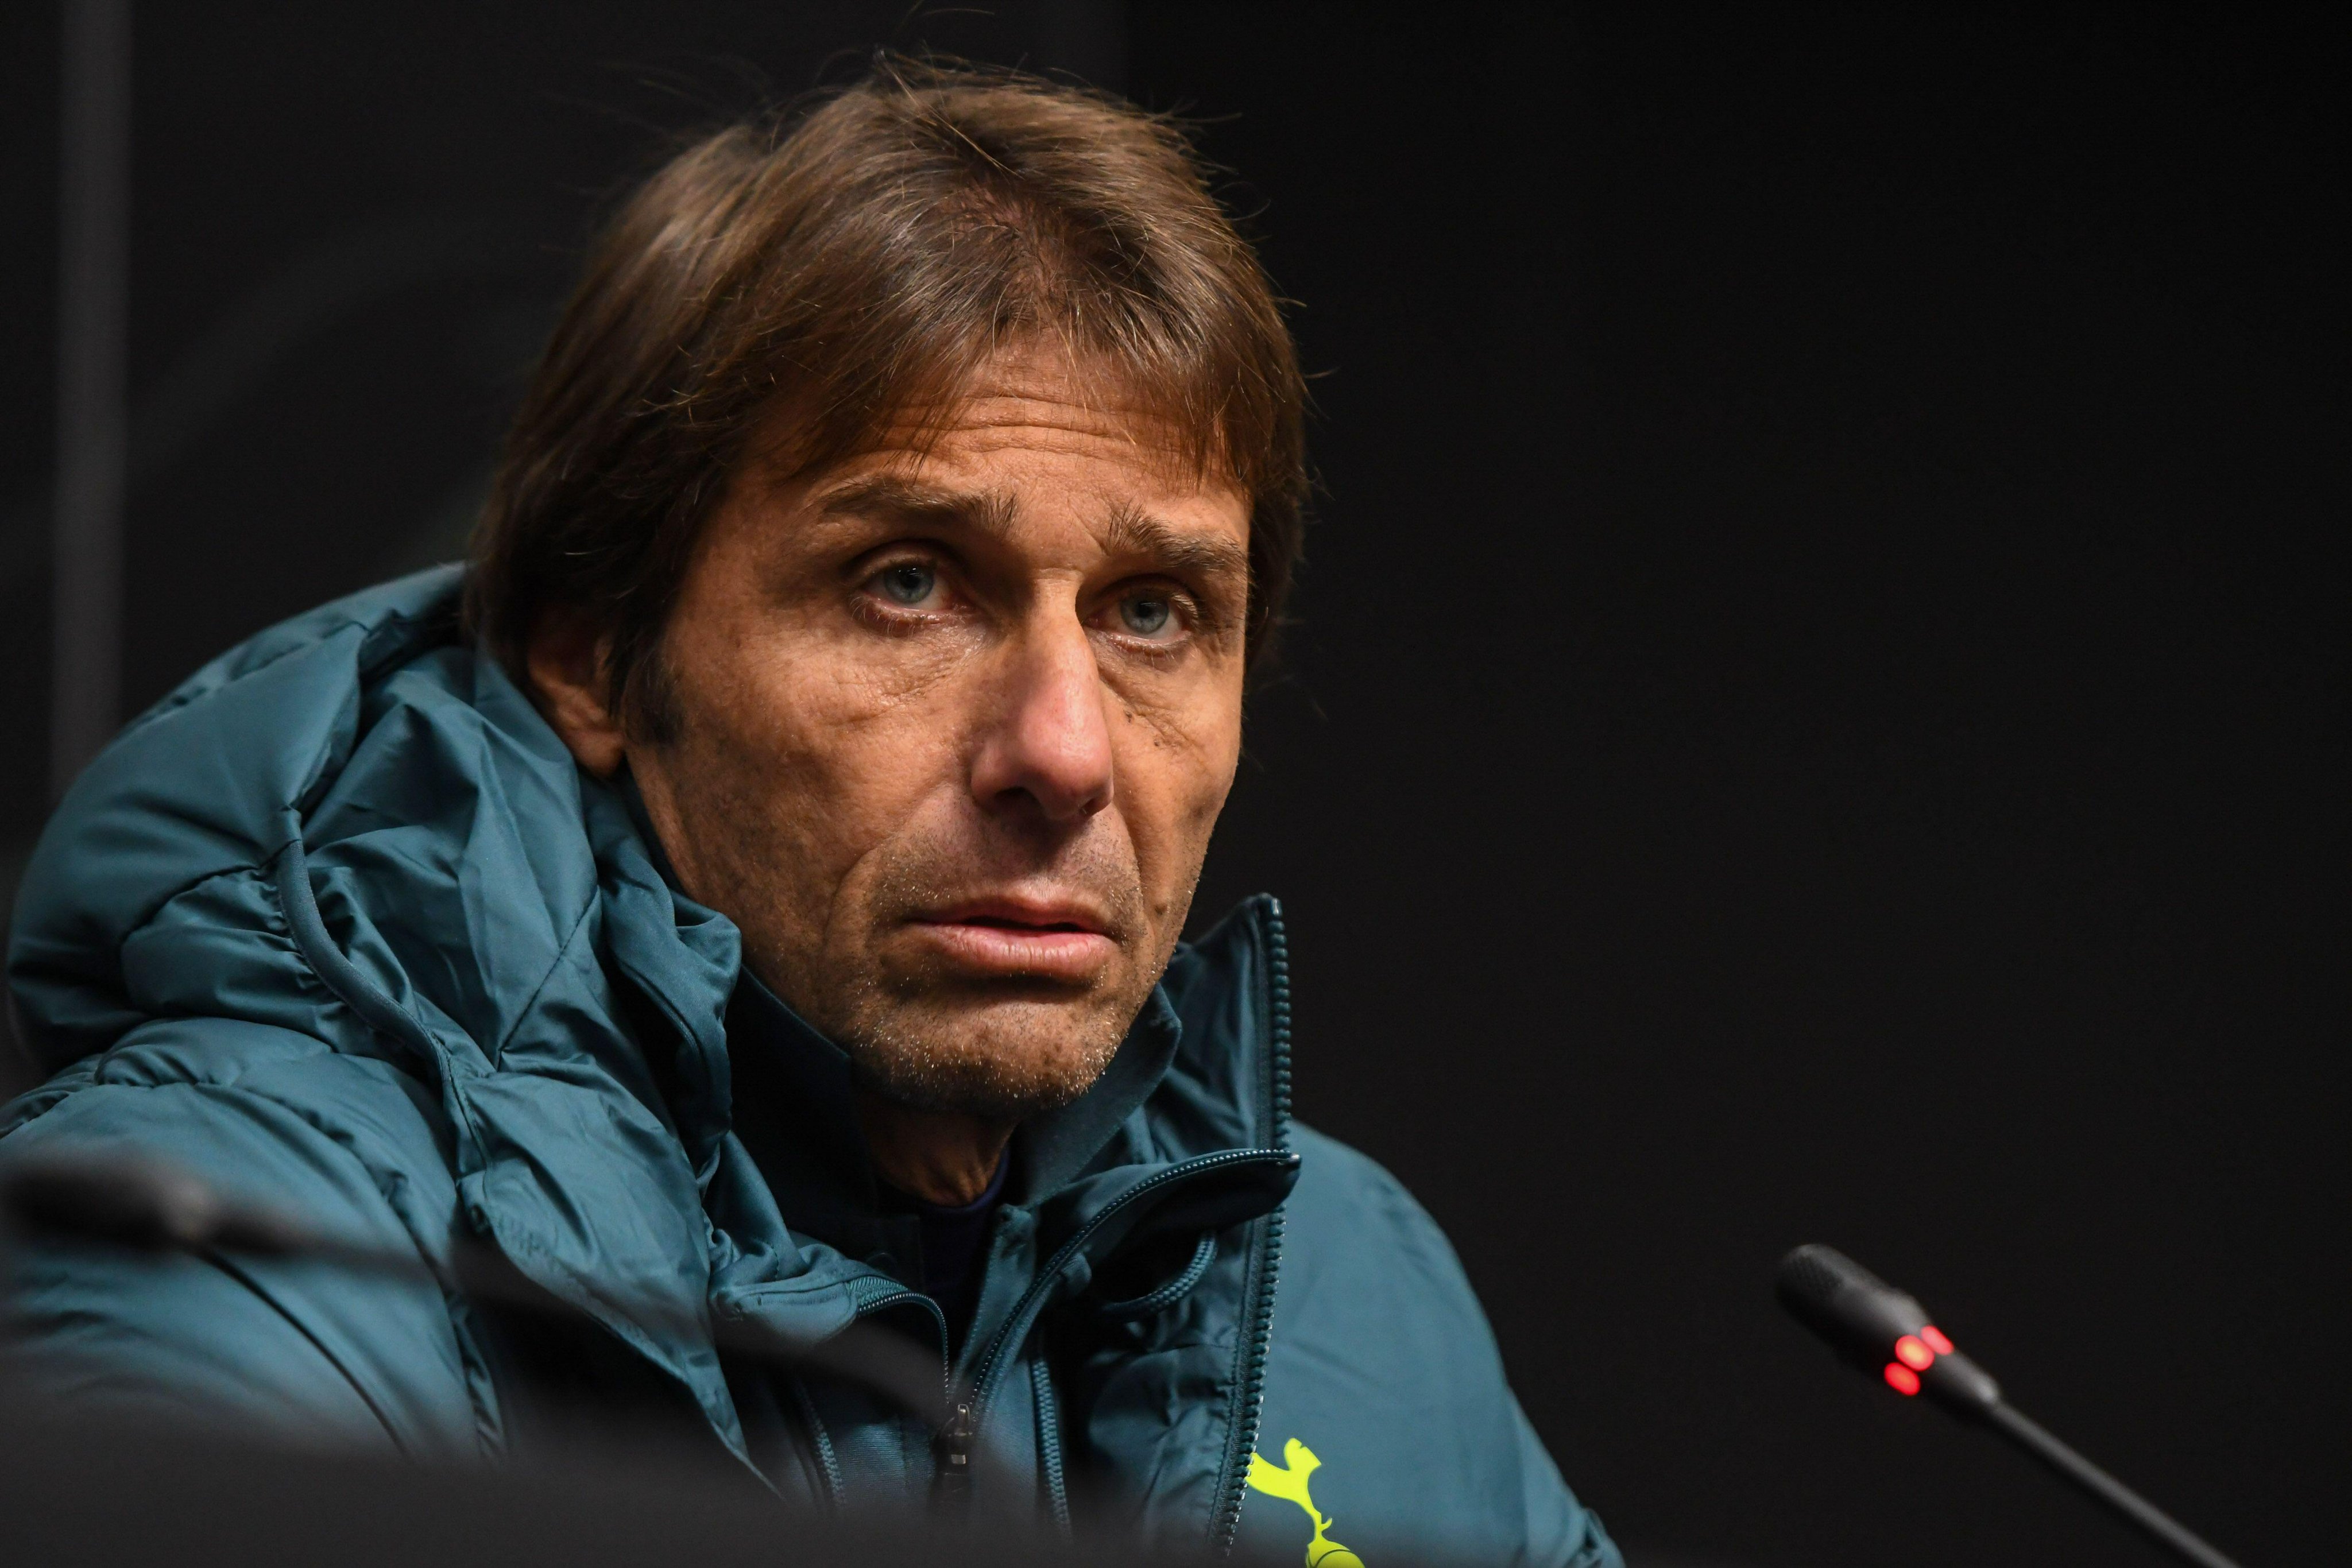 Nine games to go and every game is a final, claims Antonio Conte